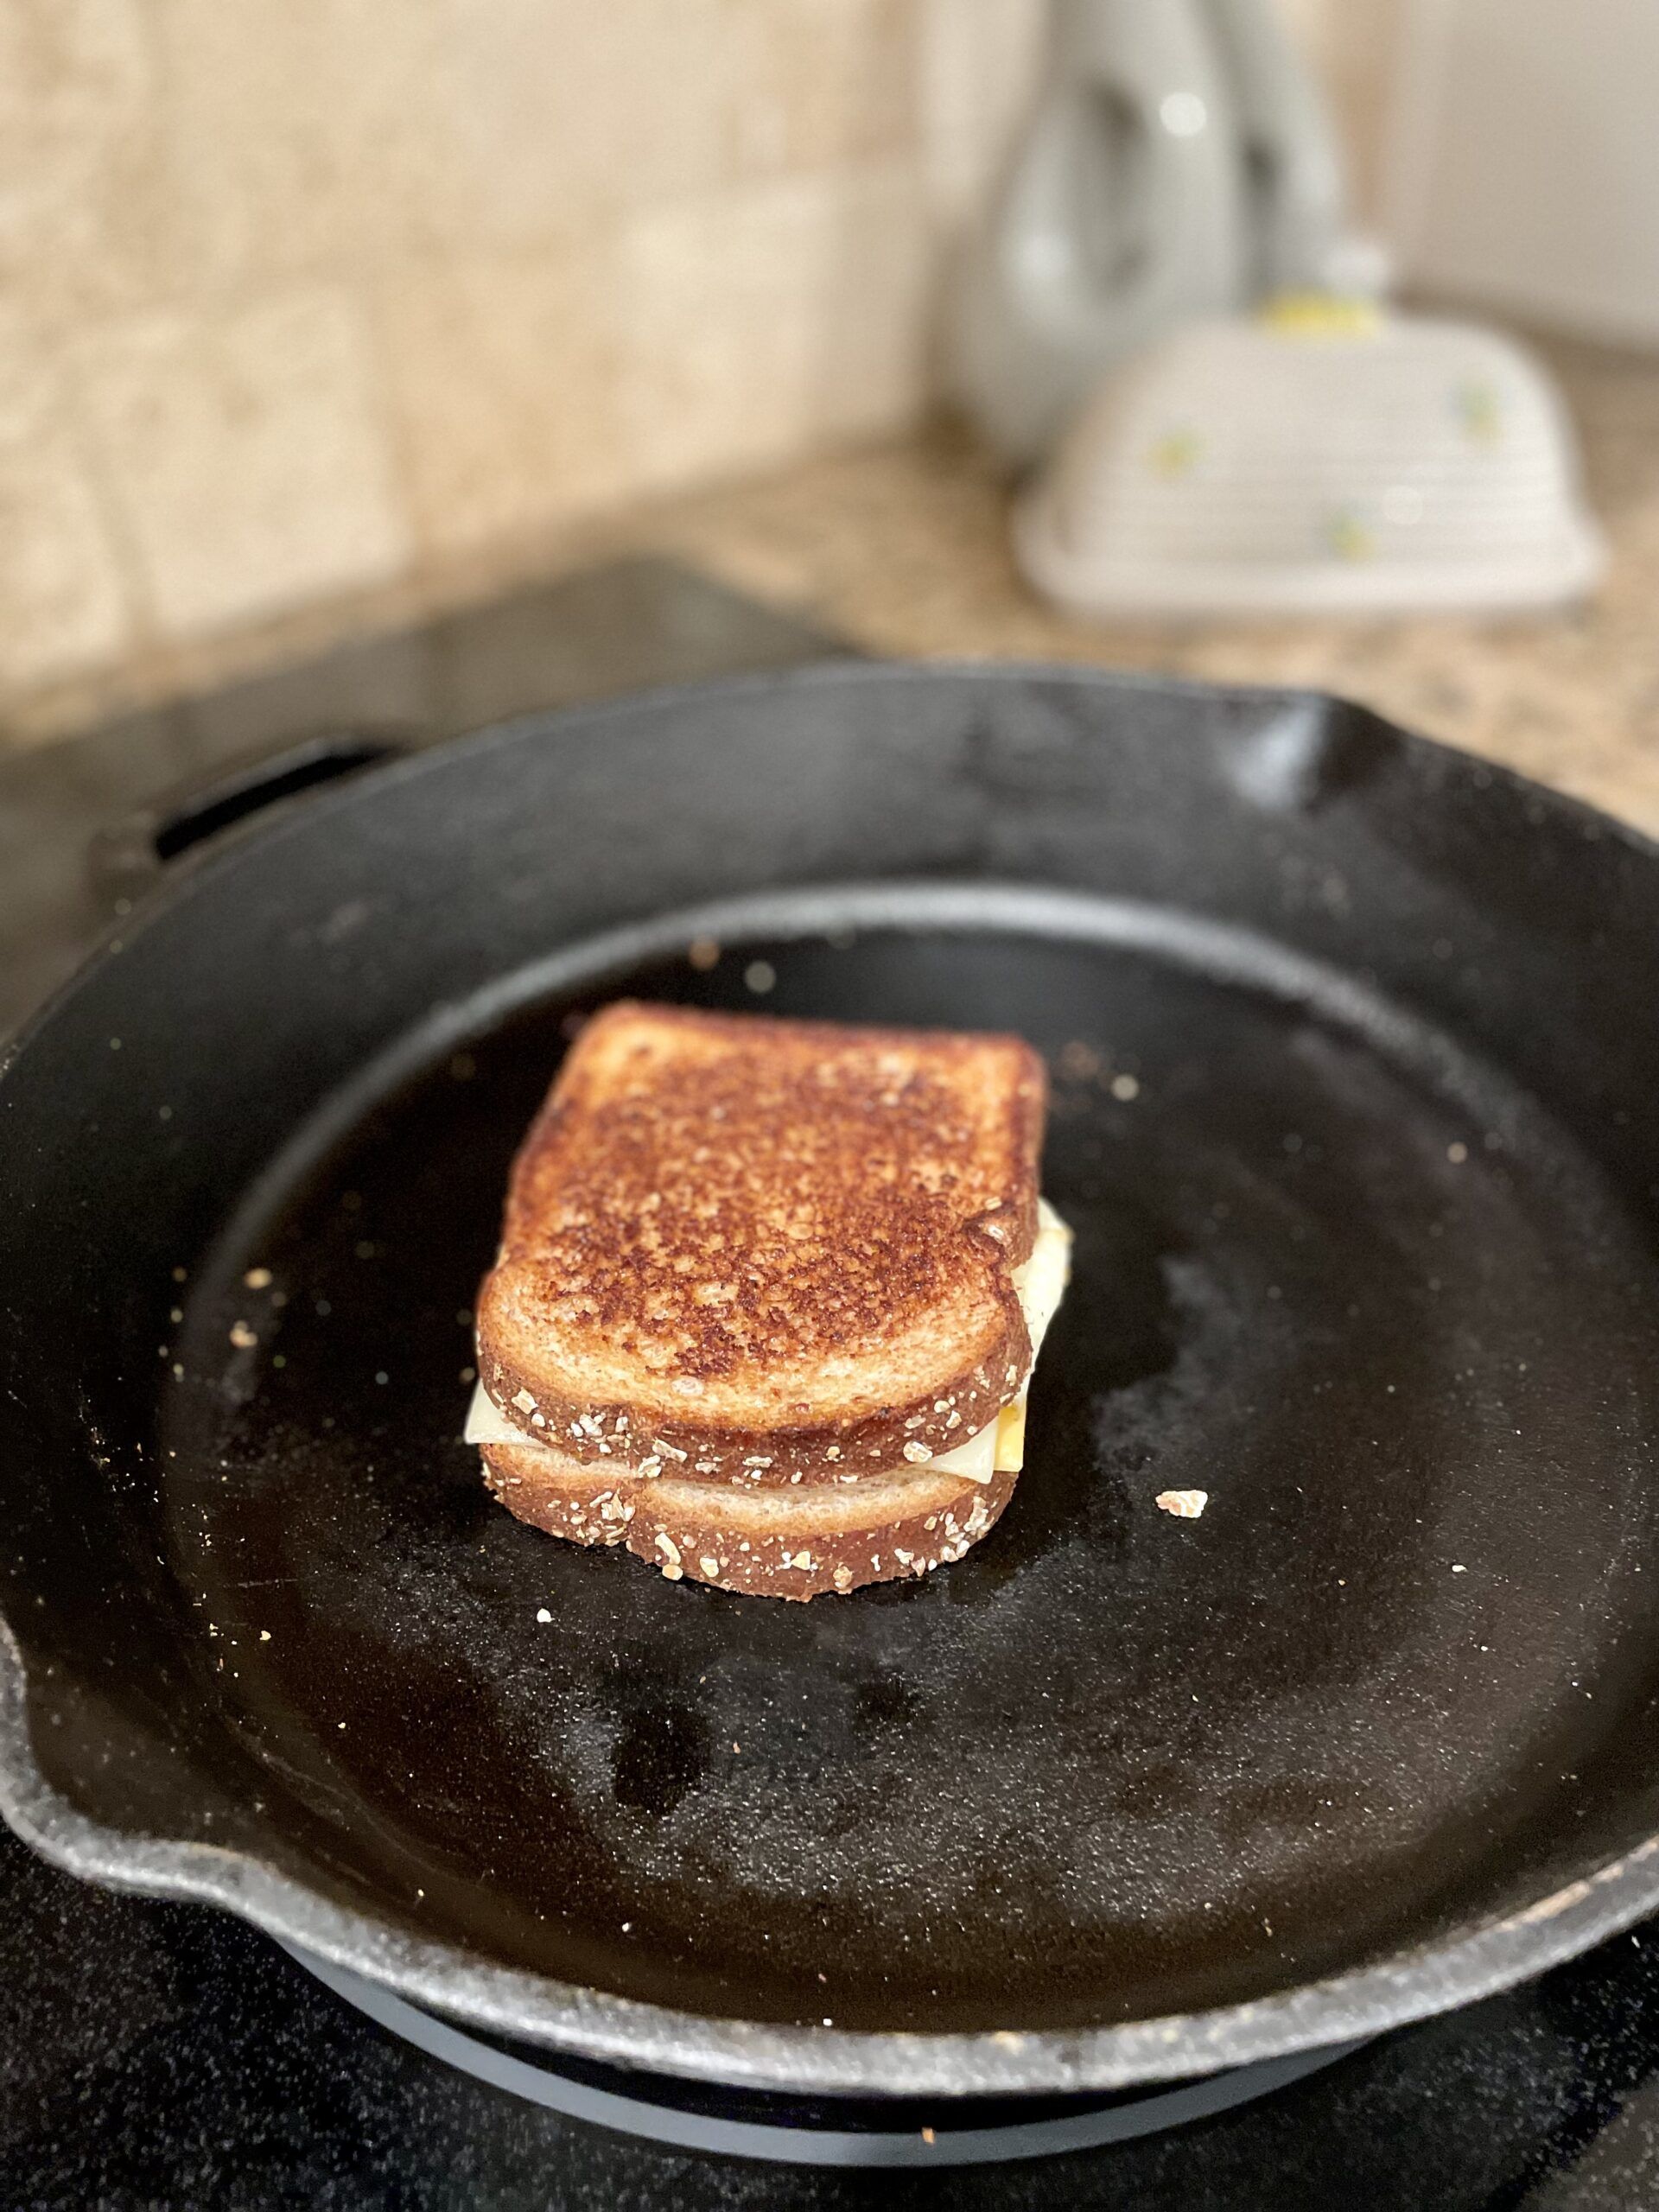 a photo of a grilled cheese in a cast iron pan, property of the author